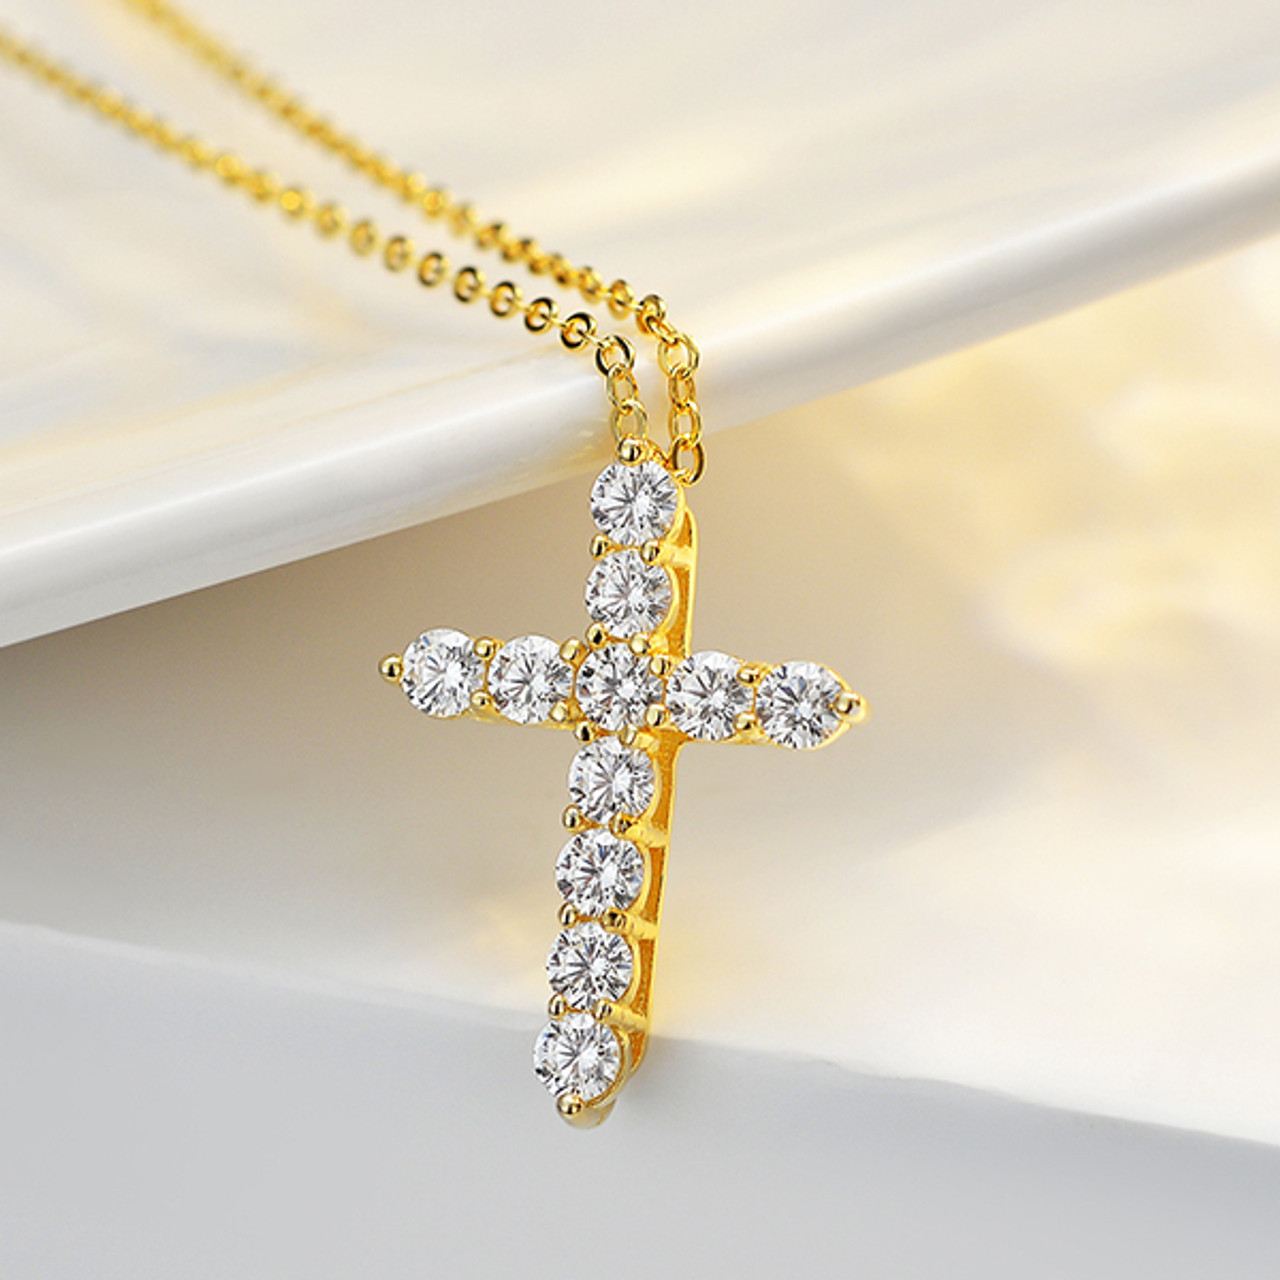 AUNOOL Cross Necklace for Women Girls Dainty 14K Gold Plated Tiny Cross  Pendant Necklaces for Women Girls Jewelry Gifts - Walmart.com